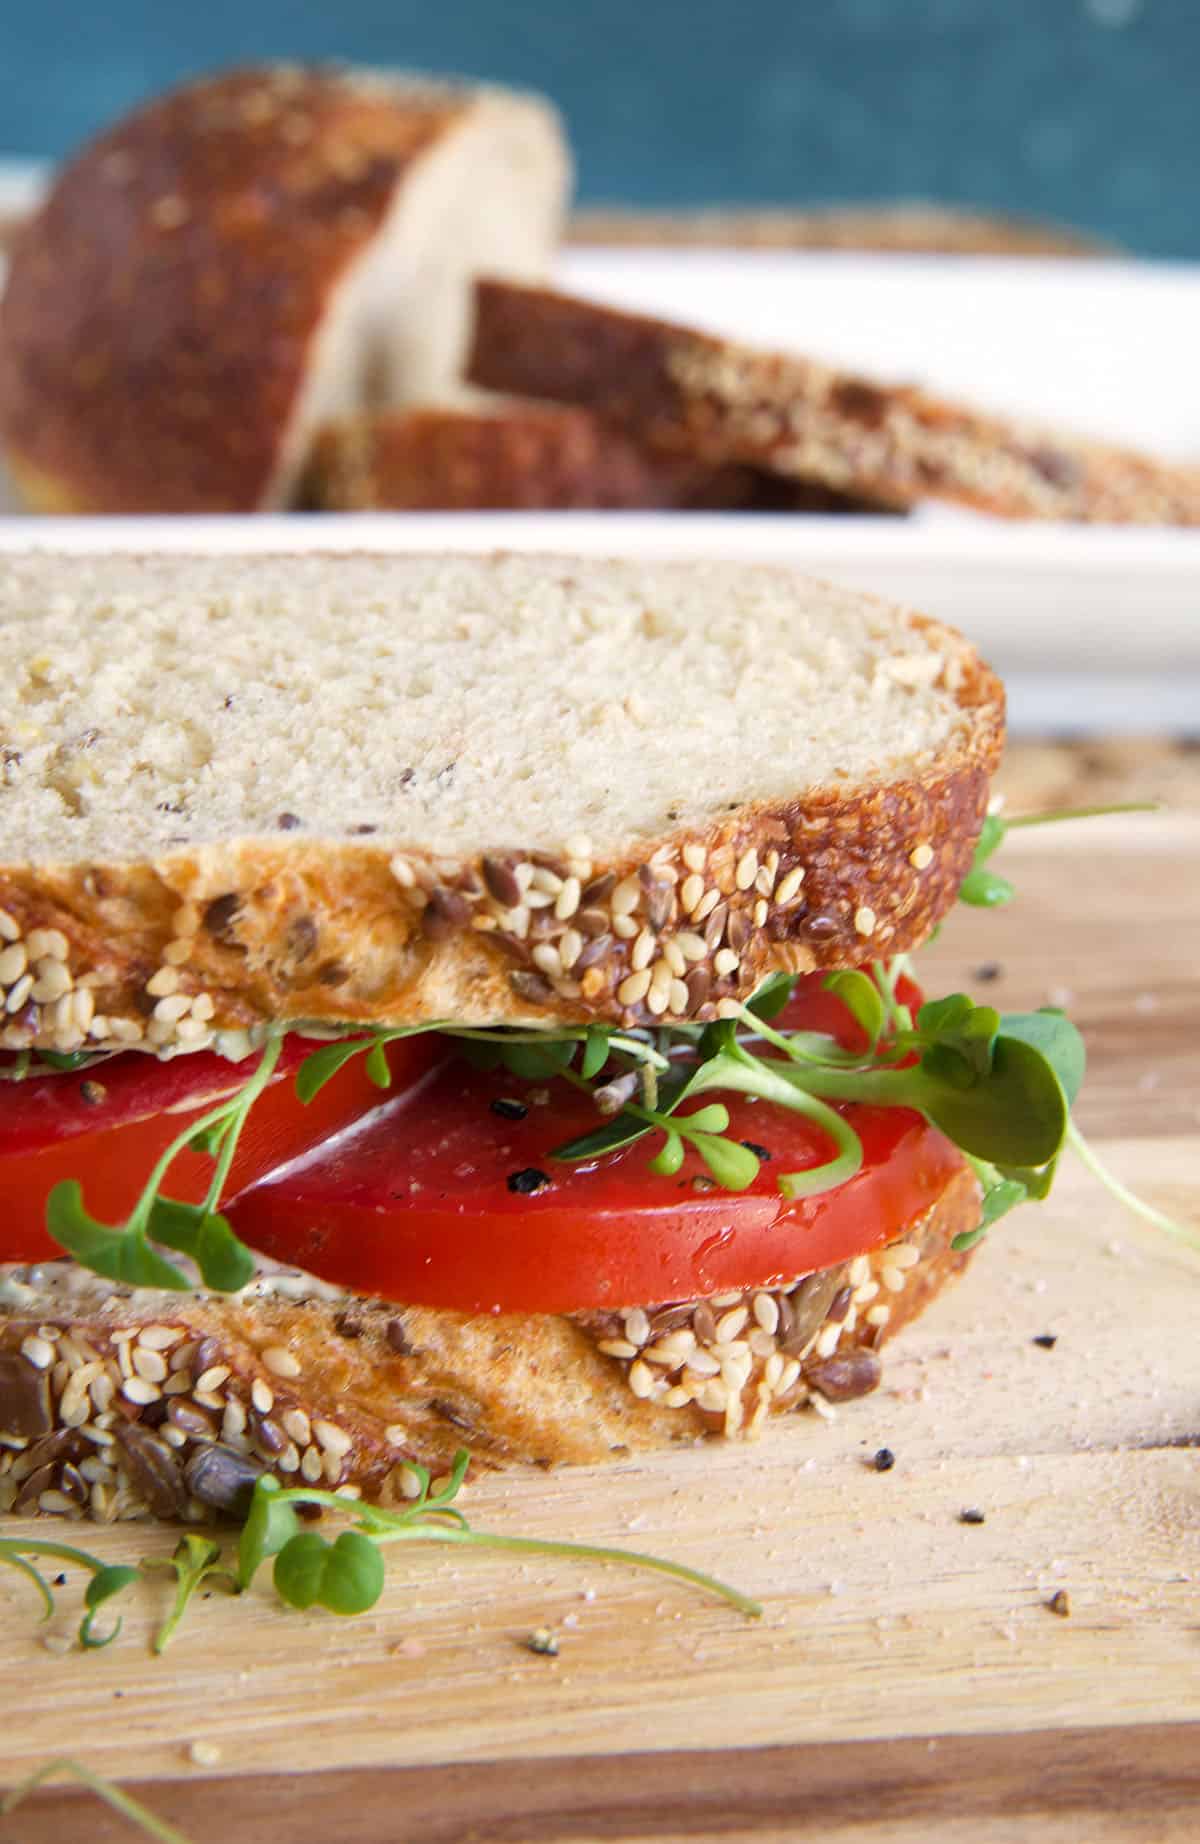 A tomato sandwich is placed on a wooden surface.